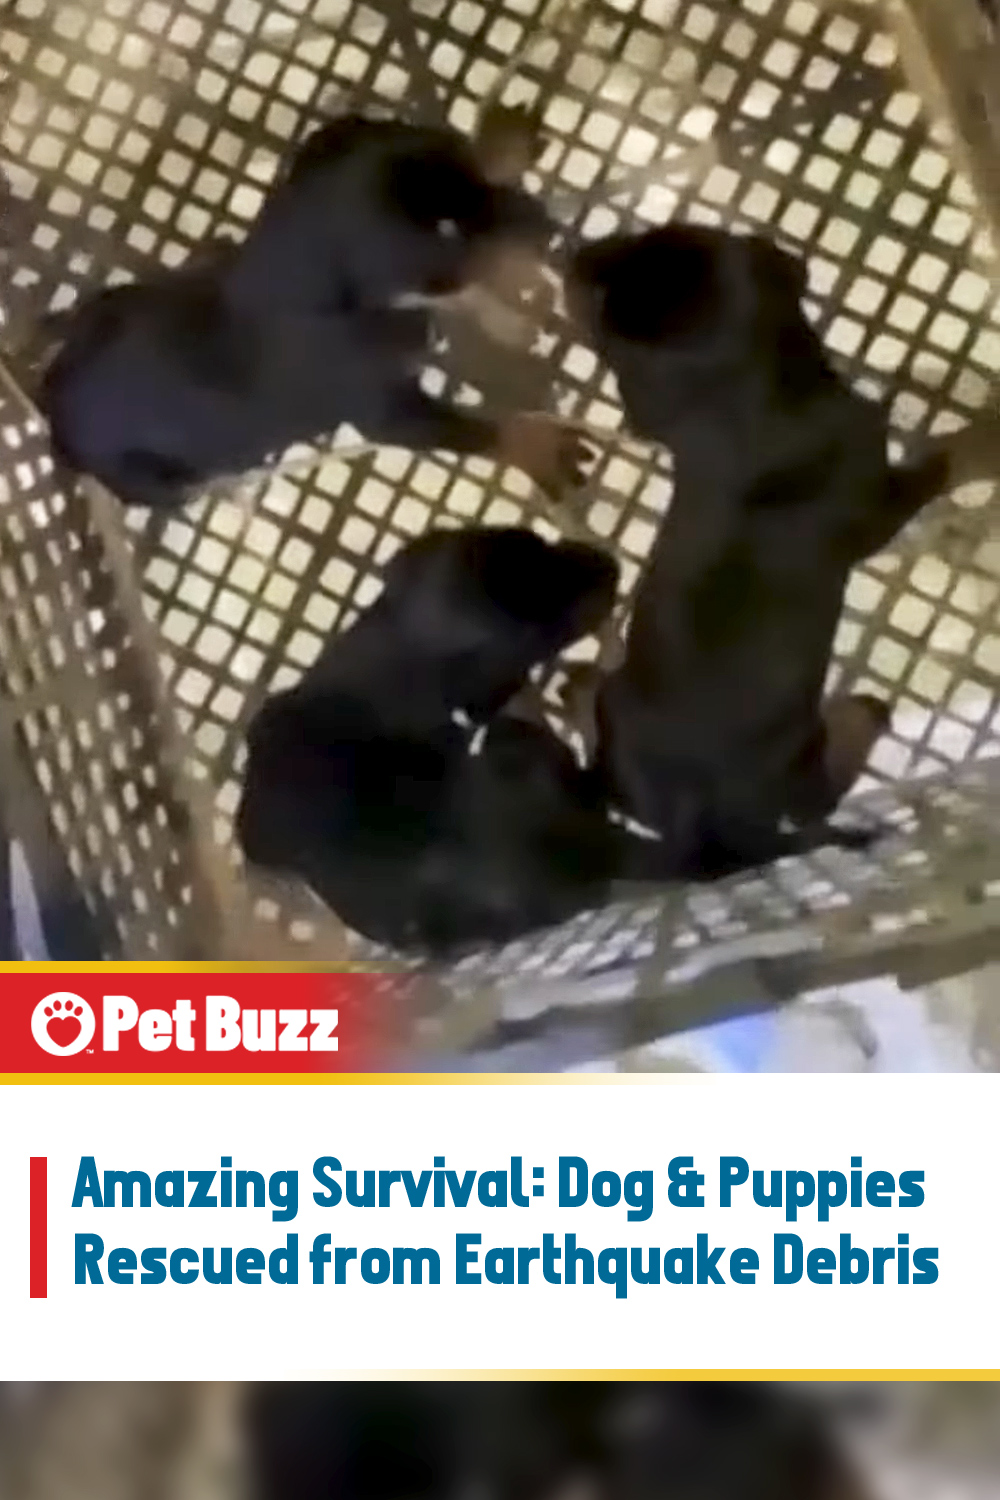 Amazing Survival: Dog & Puppies Rescued from Earthquake Debris